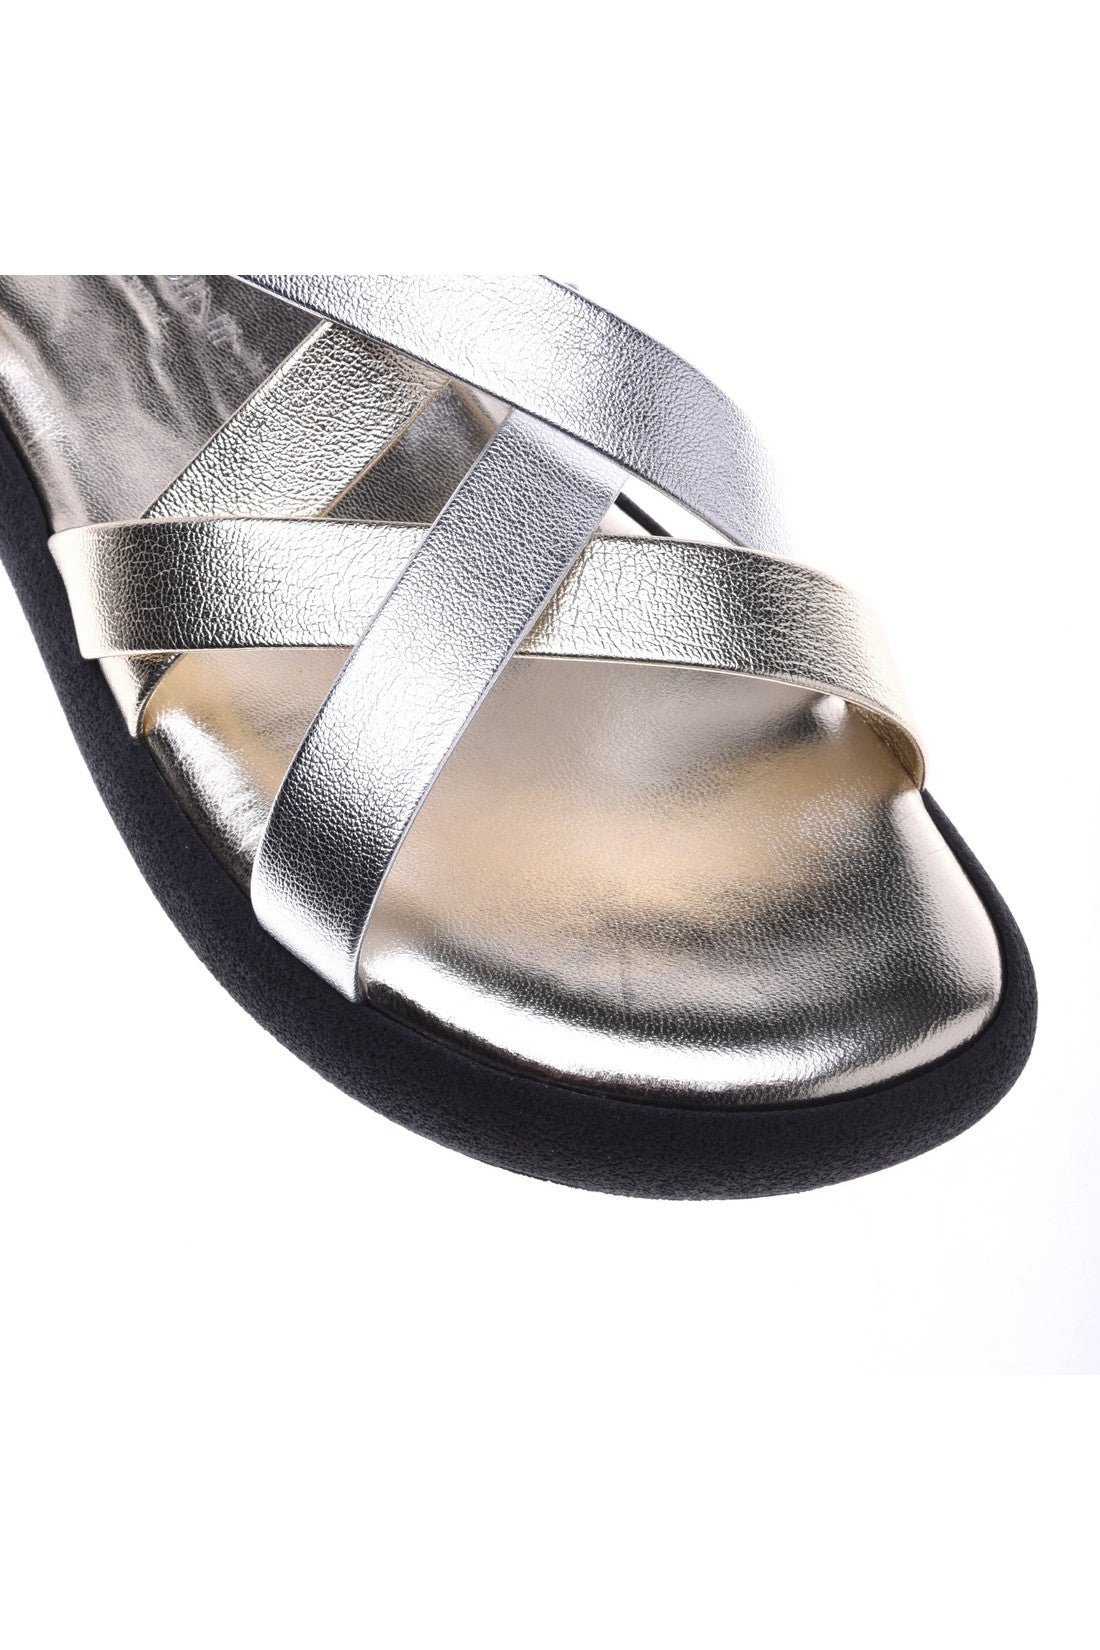 Sandal in silver and platinum laminated nappa leather